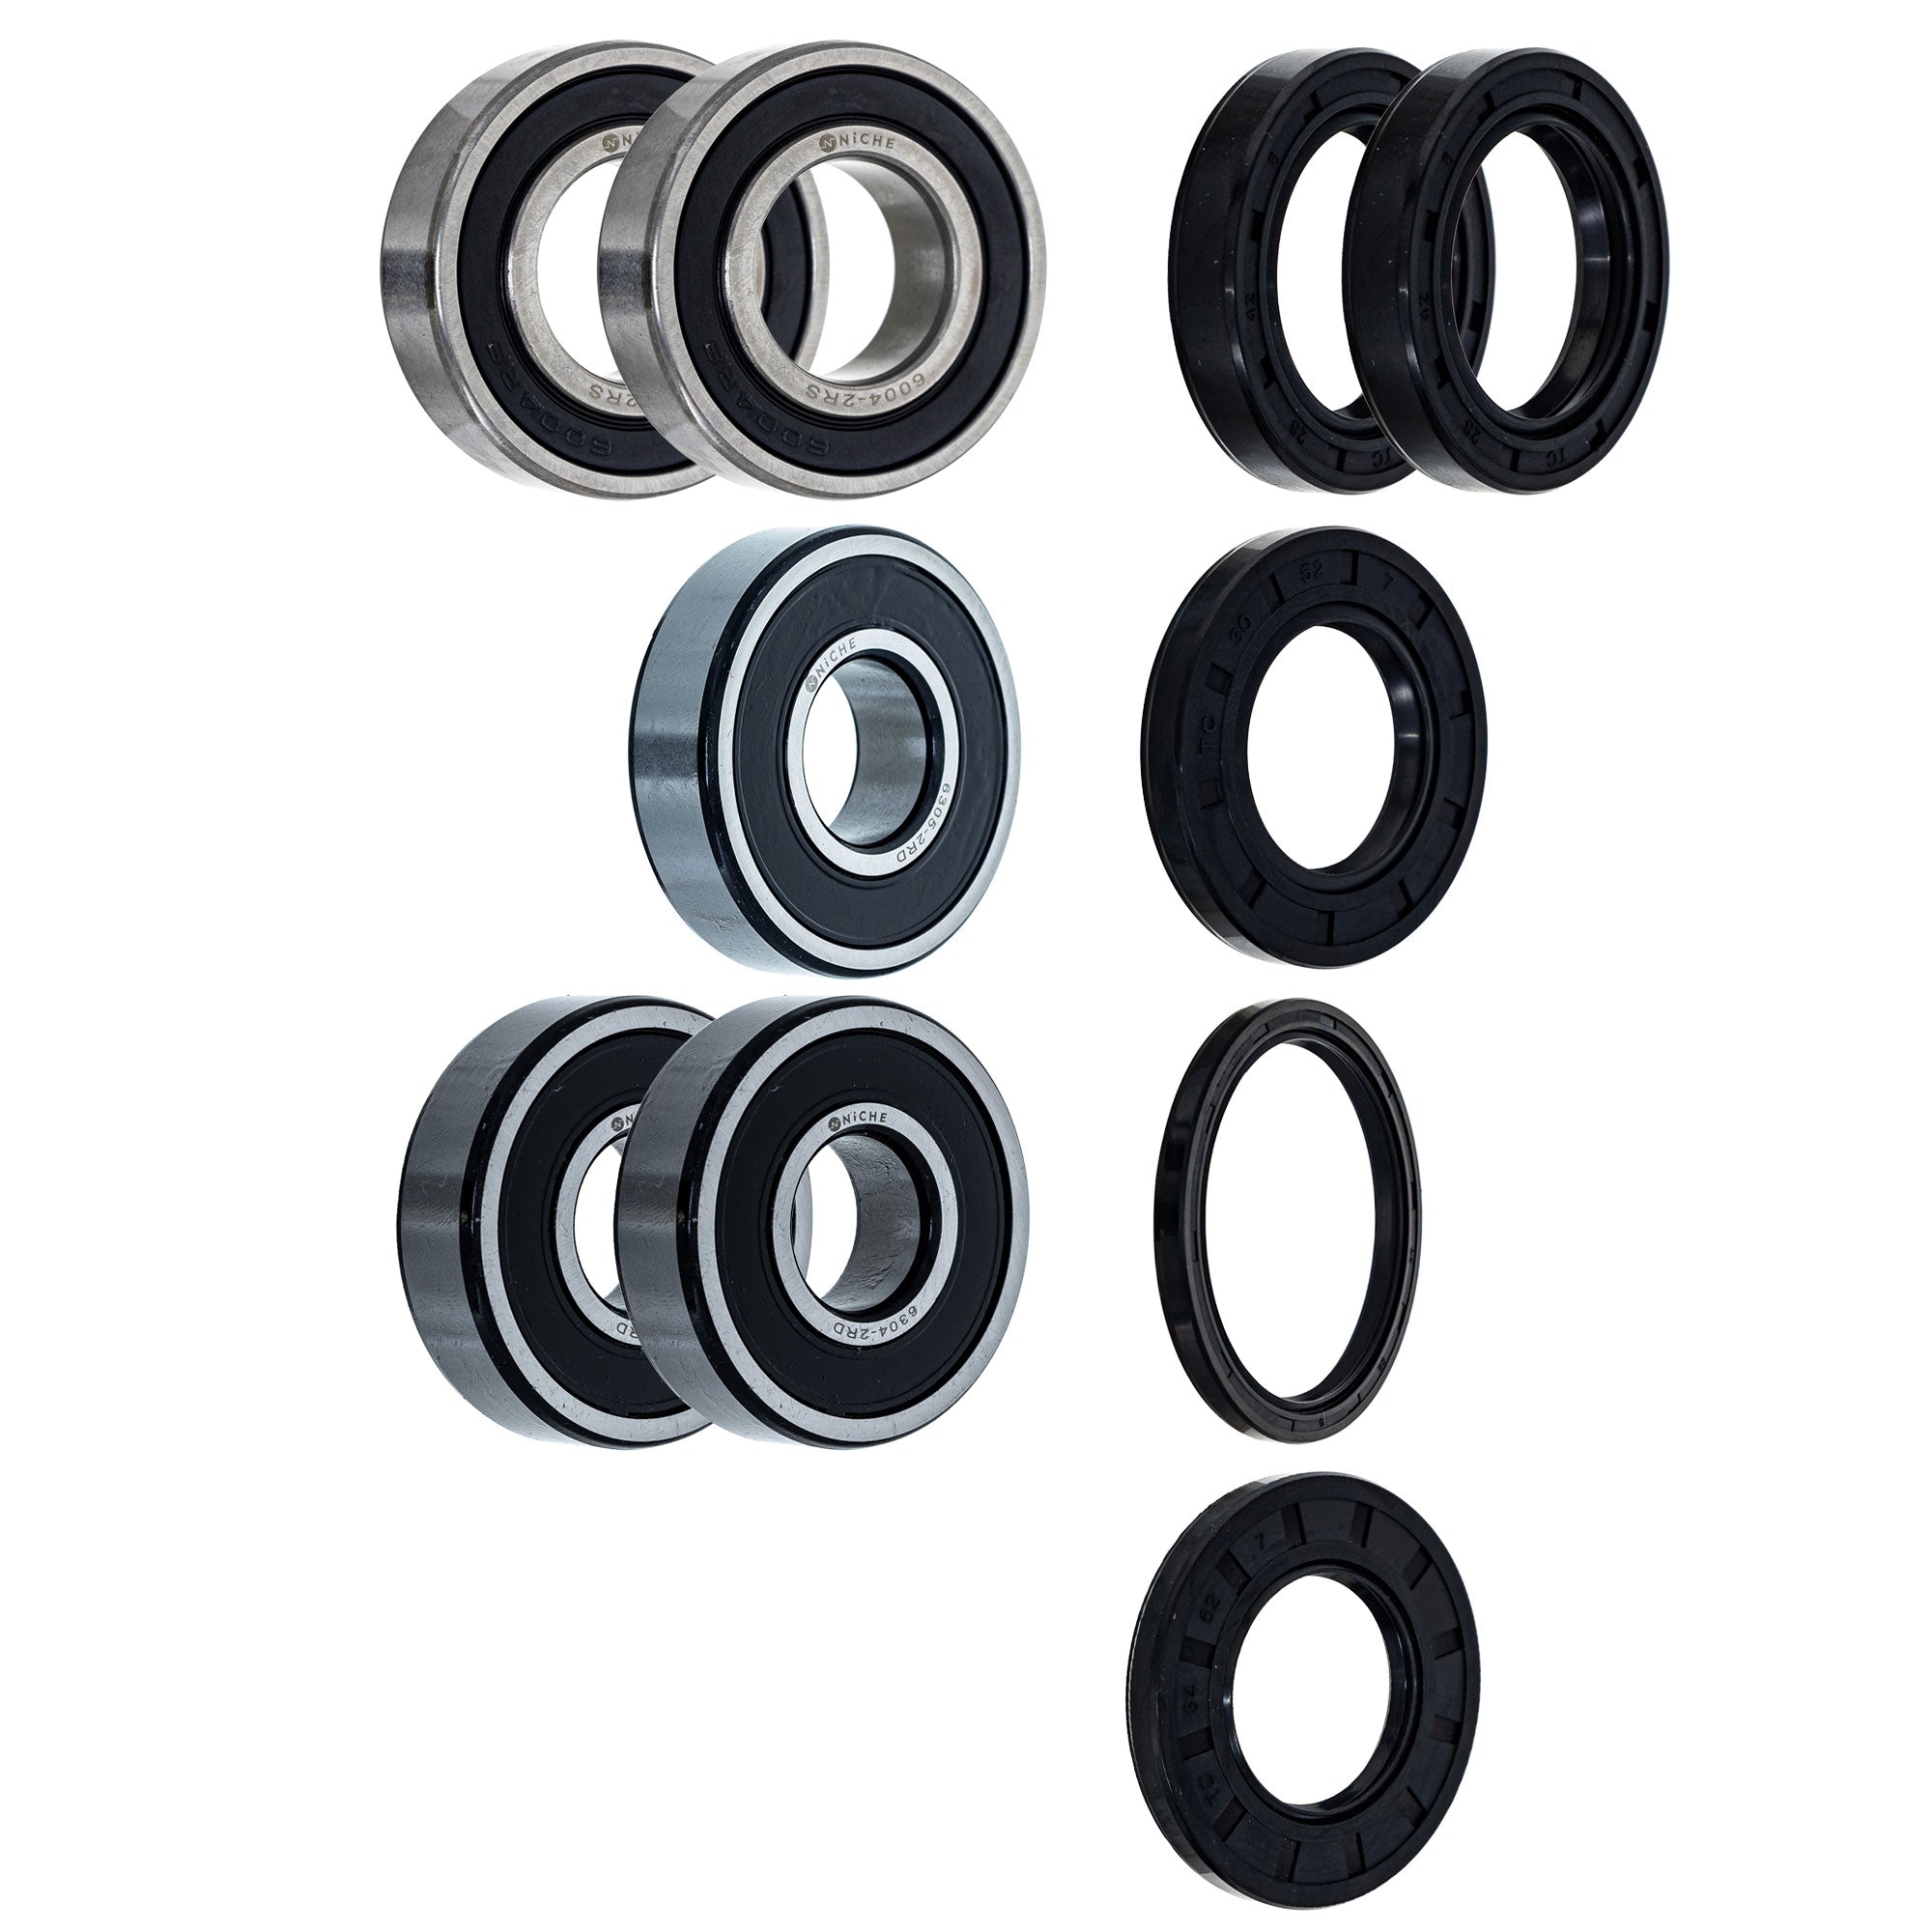 Wheel Bearing Seal Kit for zOTHER Ref No CB1000 NICHE MK1008521